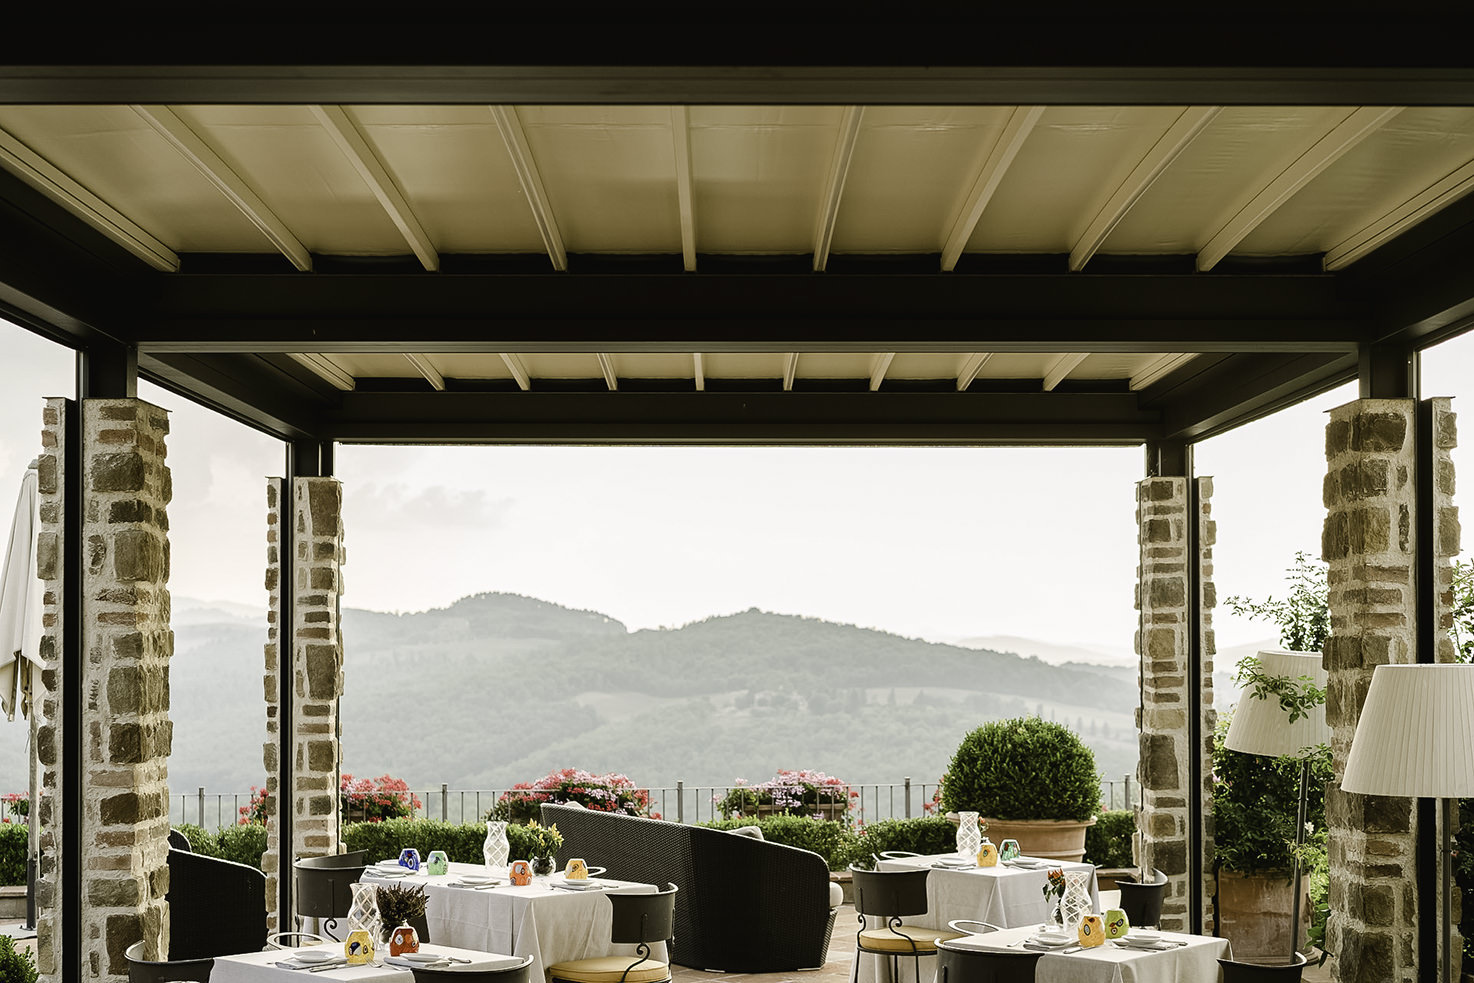 View of the hills from the restaurant terrace